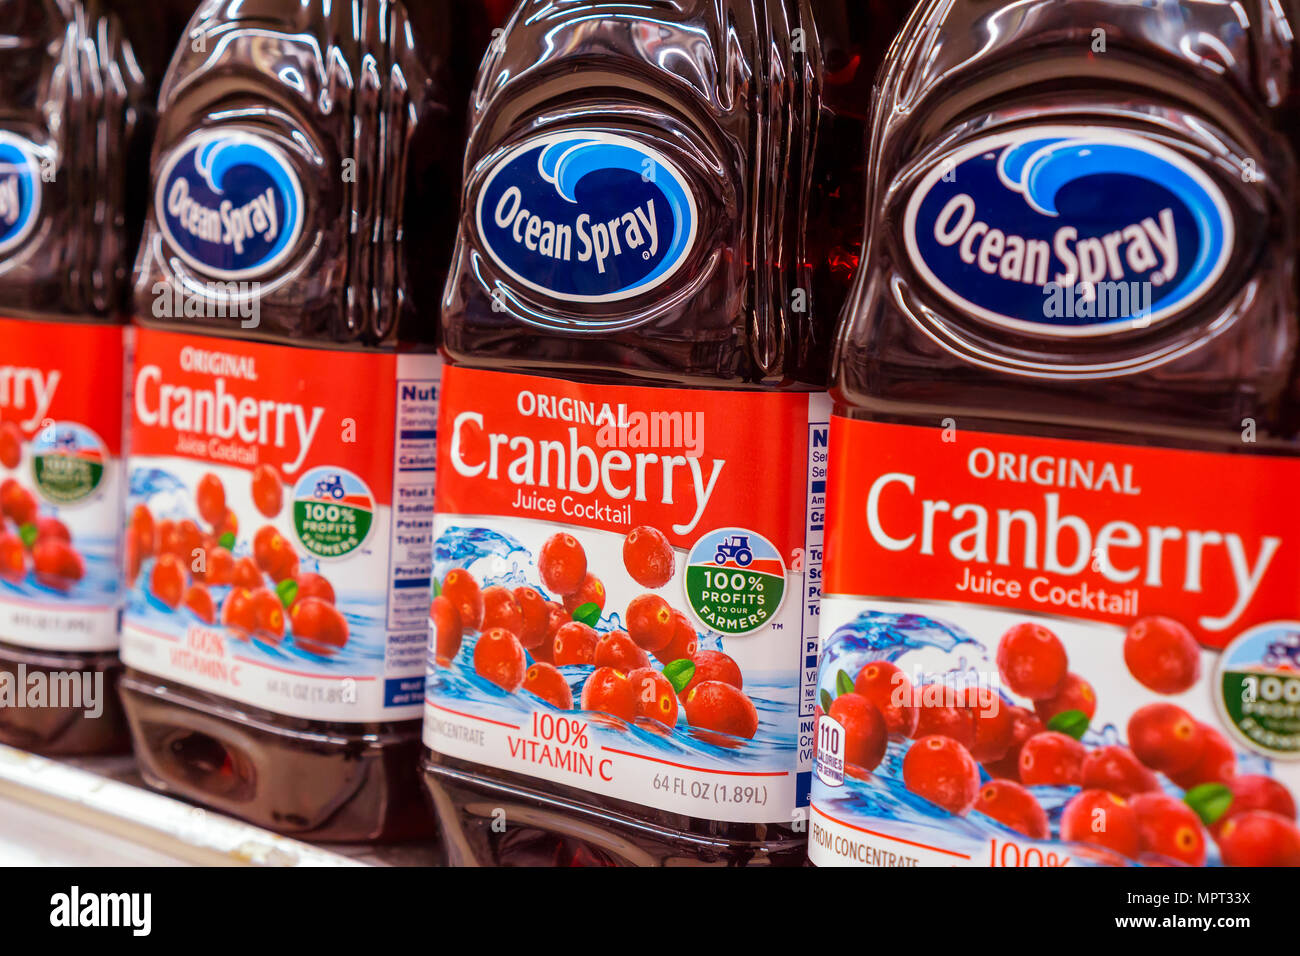 Bottles of Ocean Spray brand cooperative cranberry juice is seen in a supermarket in New York on Monday, May 21, 2018. The U.S. Dept. of Agriculture is proposing a regulation on the volume of cranberries produced by farmers for 2018-19 crops. The seasonal volume regulation would cut the glut of cranberries on the market. (Â© Richard B. Levine) Stock Photo